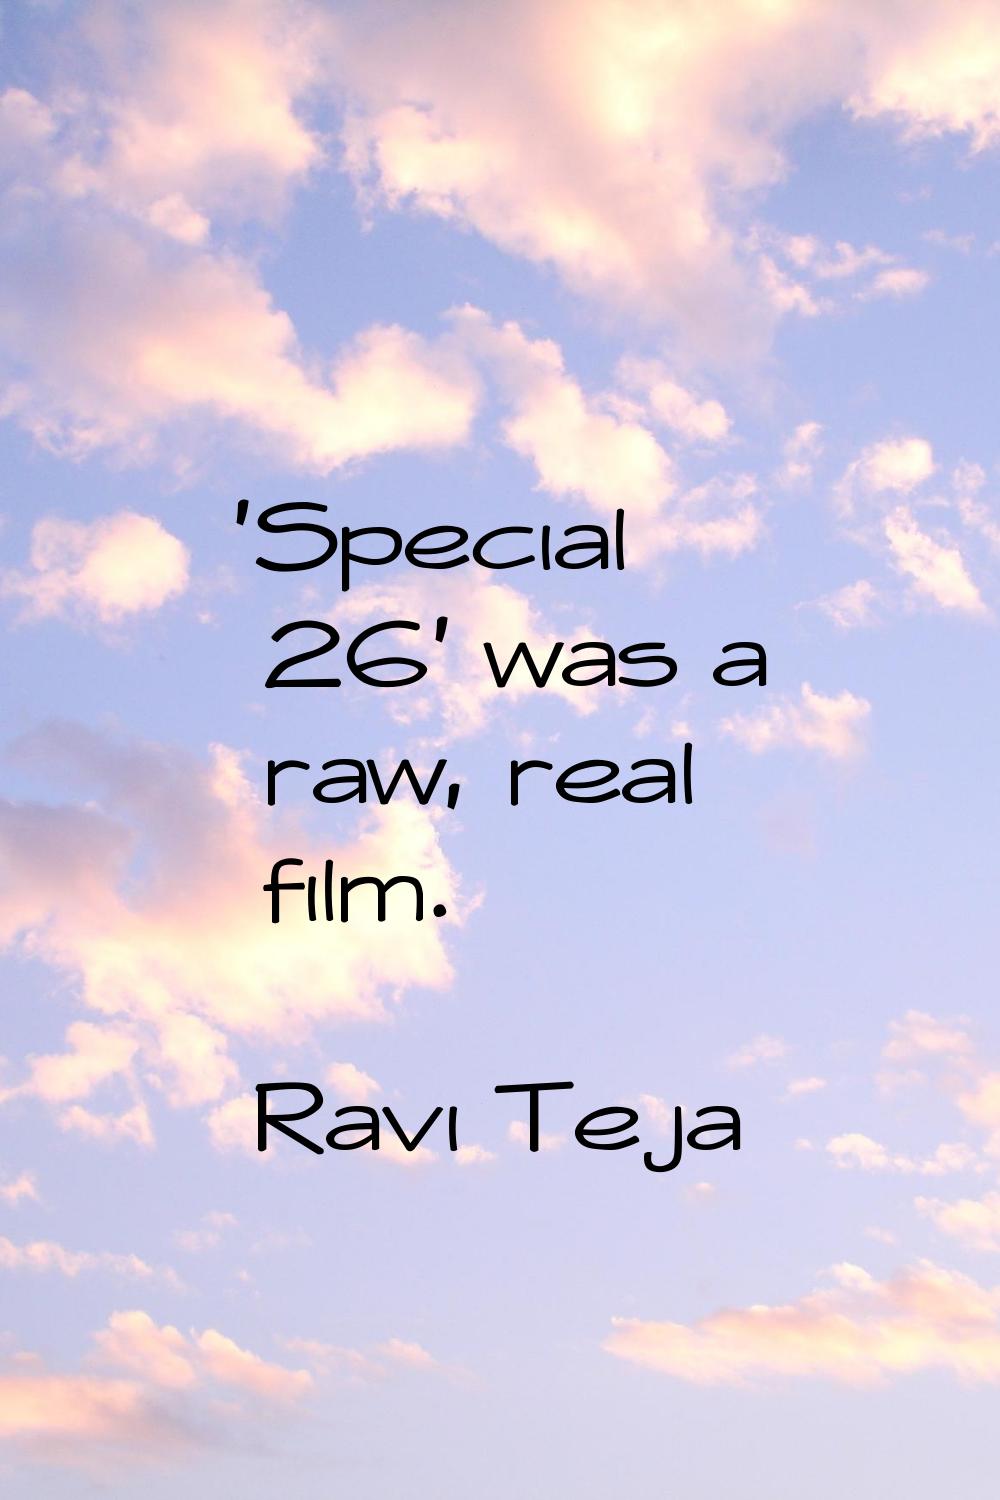 'Special 26' was a raw, real film.